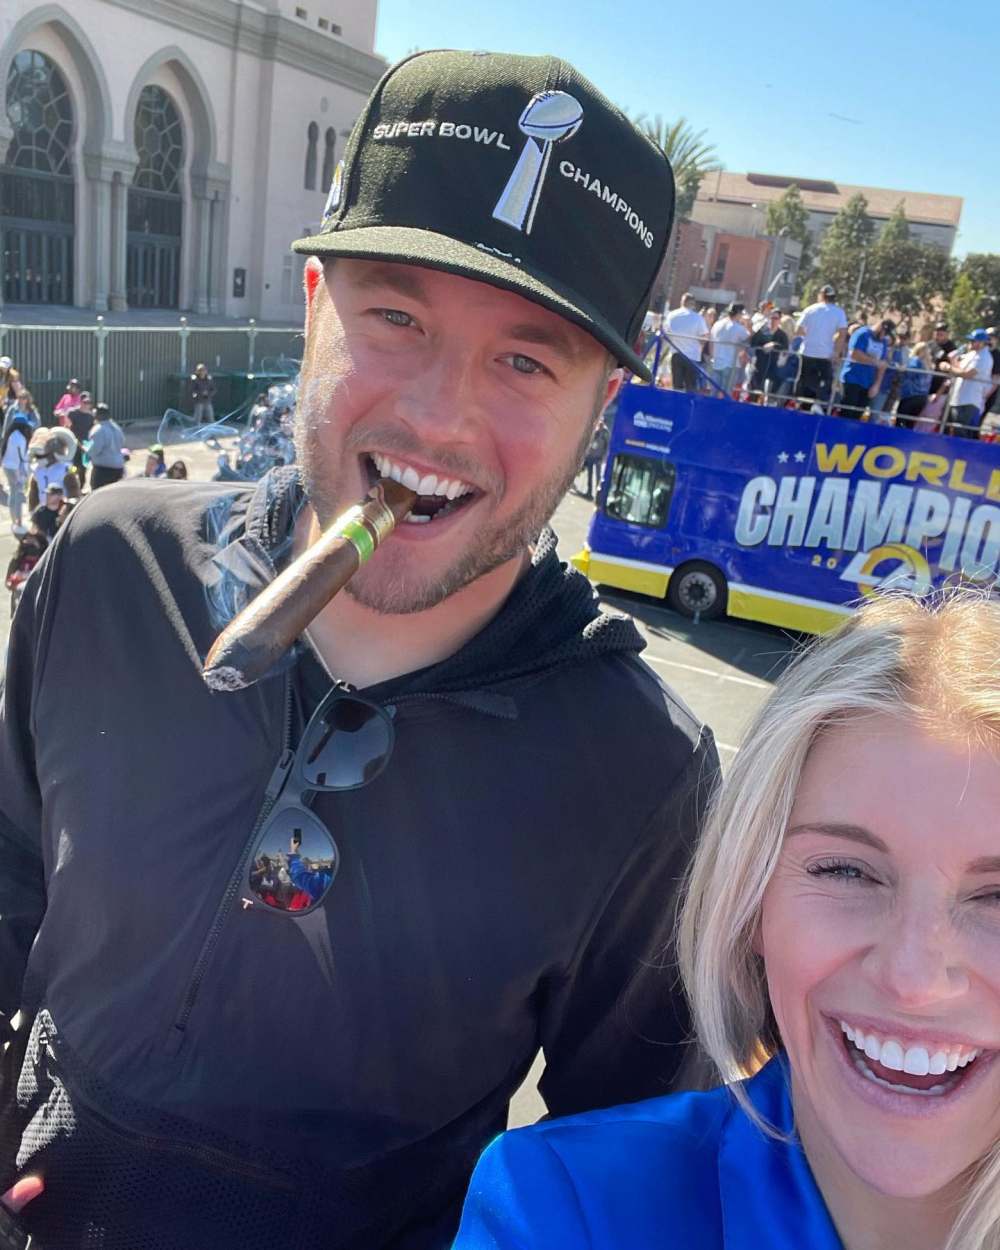 LOOK: Matthew Stafford's wedding guests with swords and neon hats 